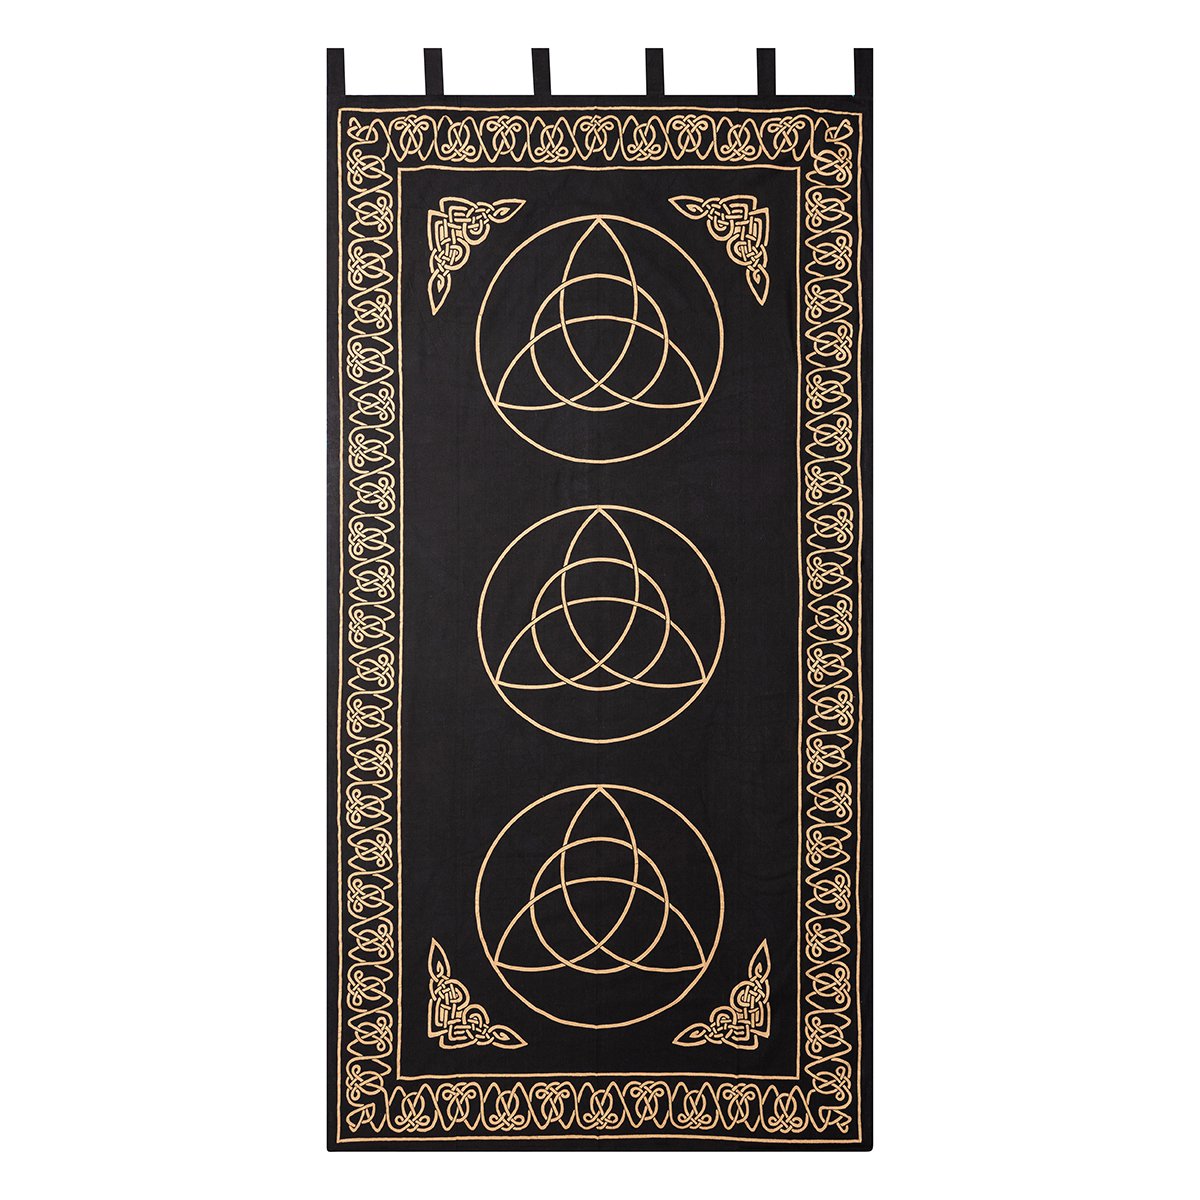 Curtain Triquetra Hippie Boho Tapestry Window Black Gold